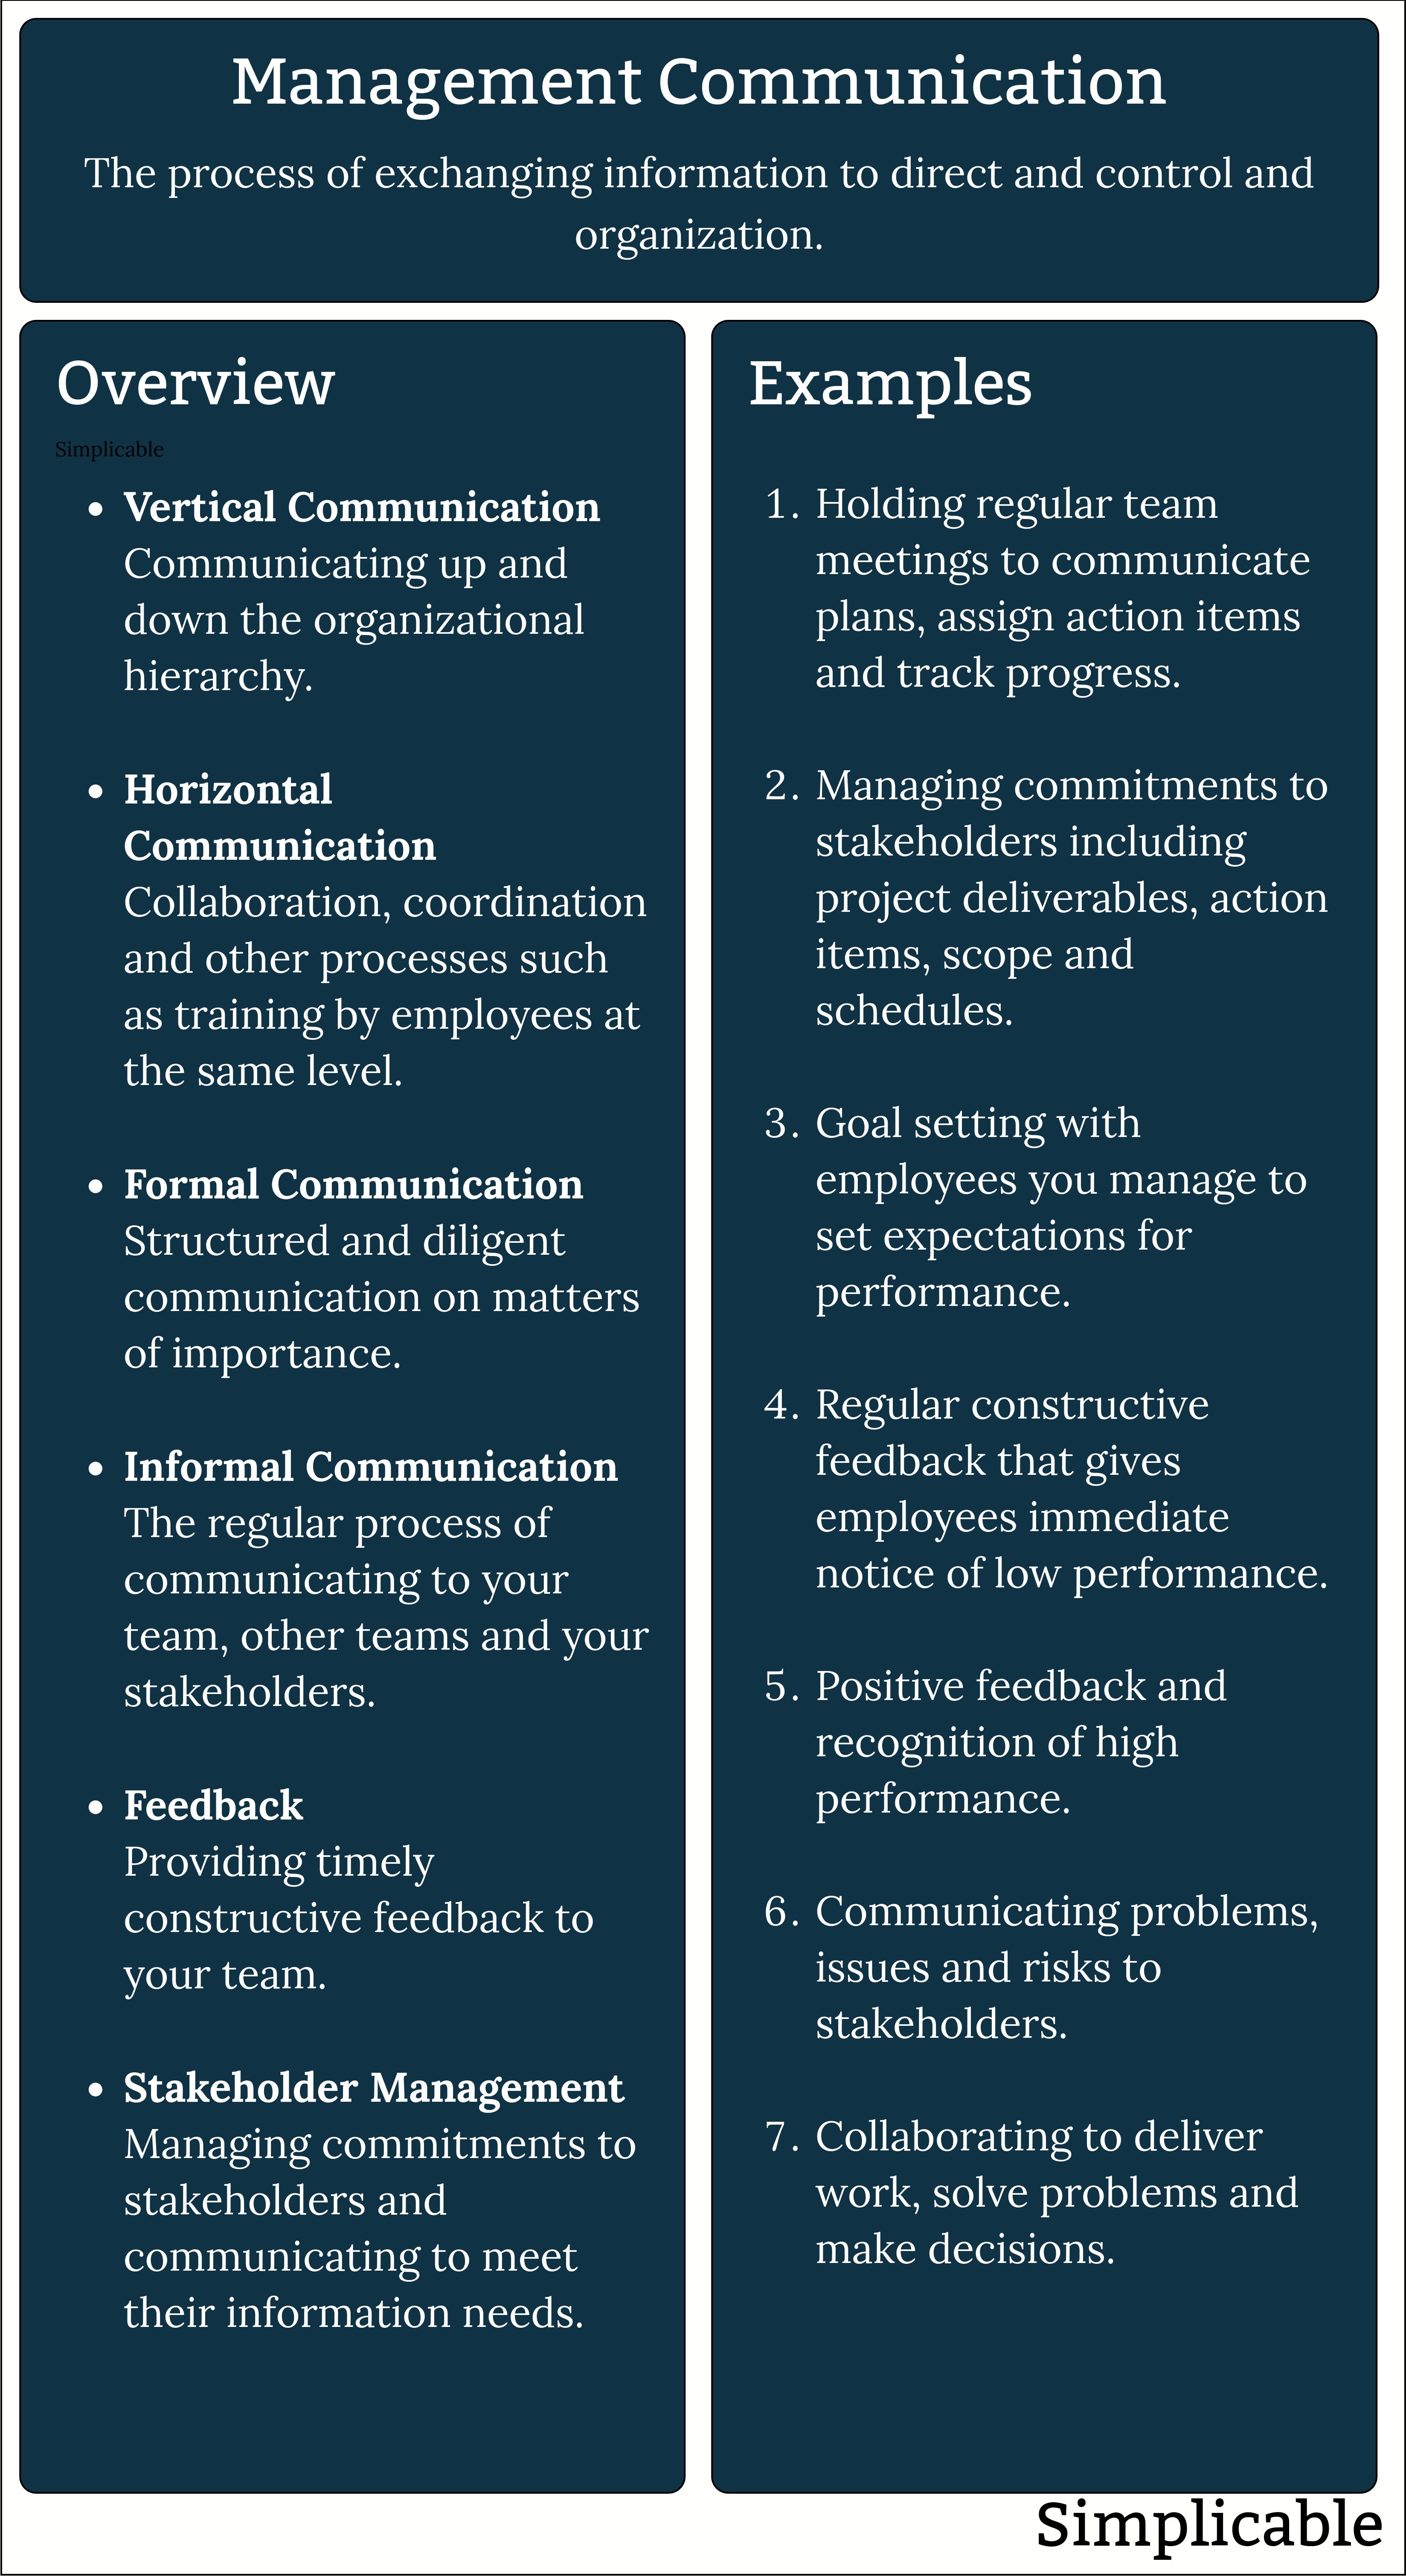 management communication definition and overview